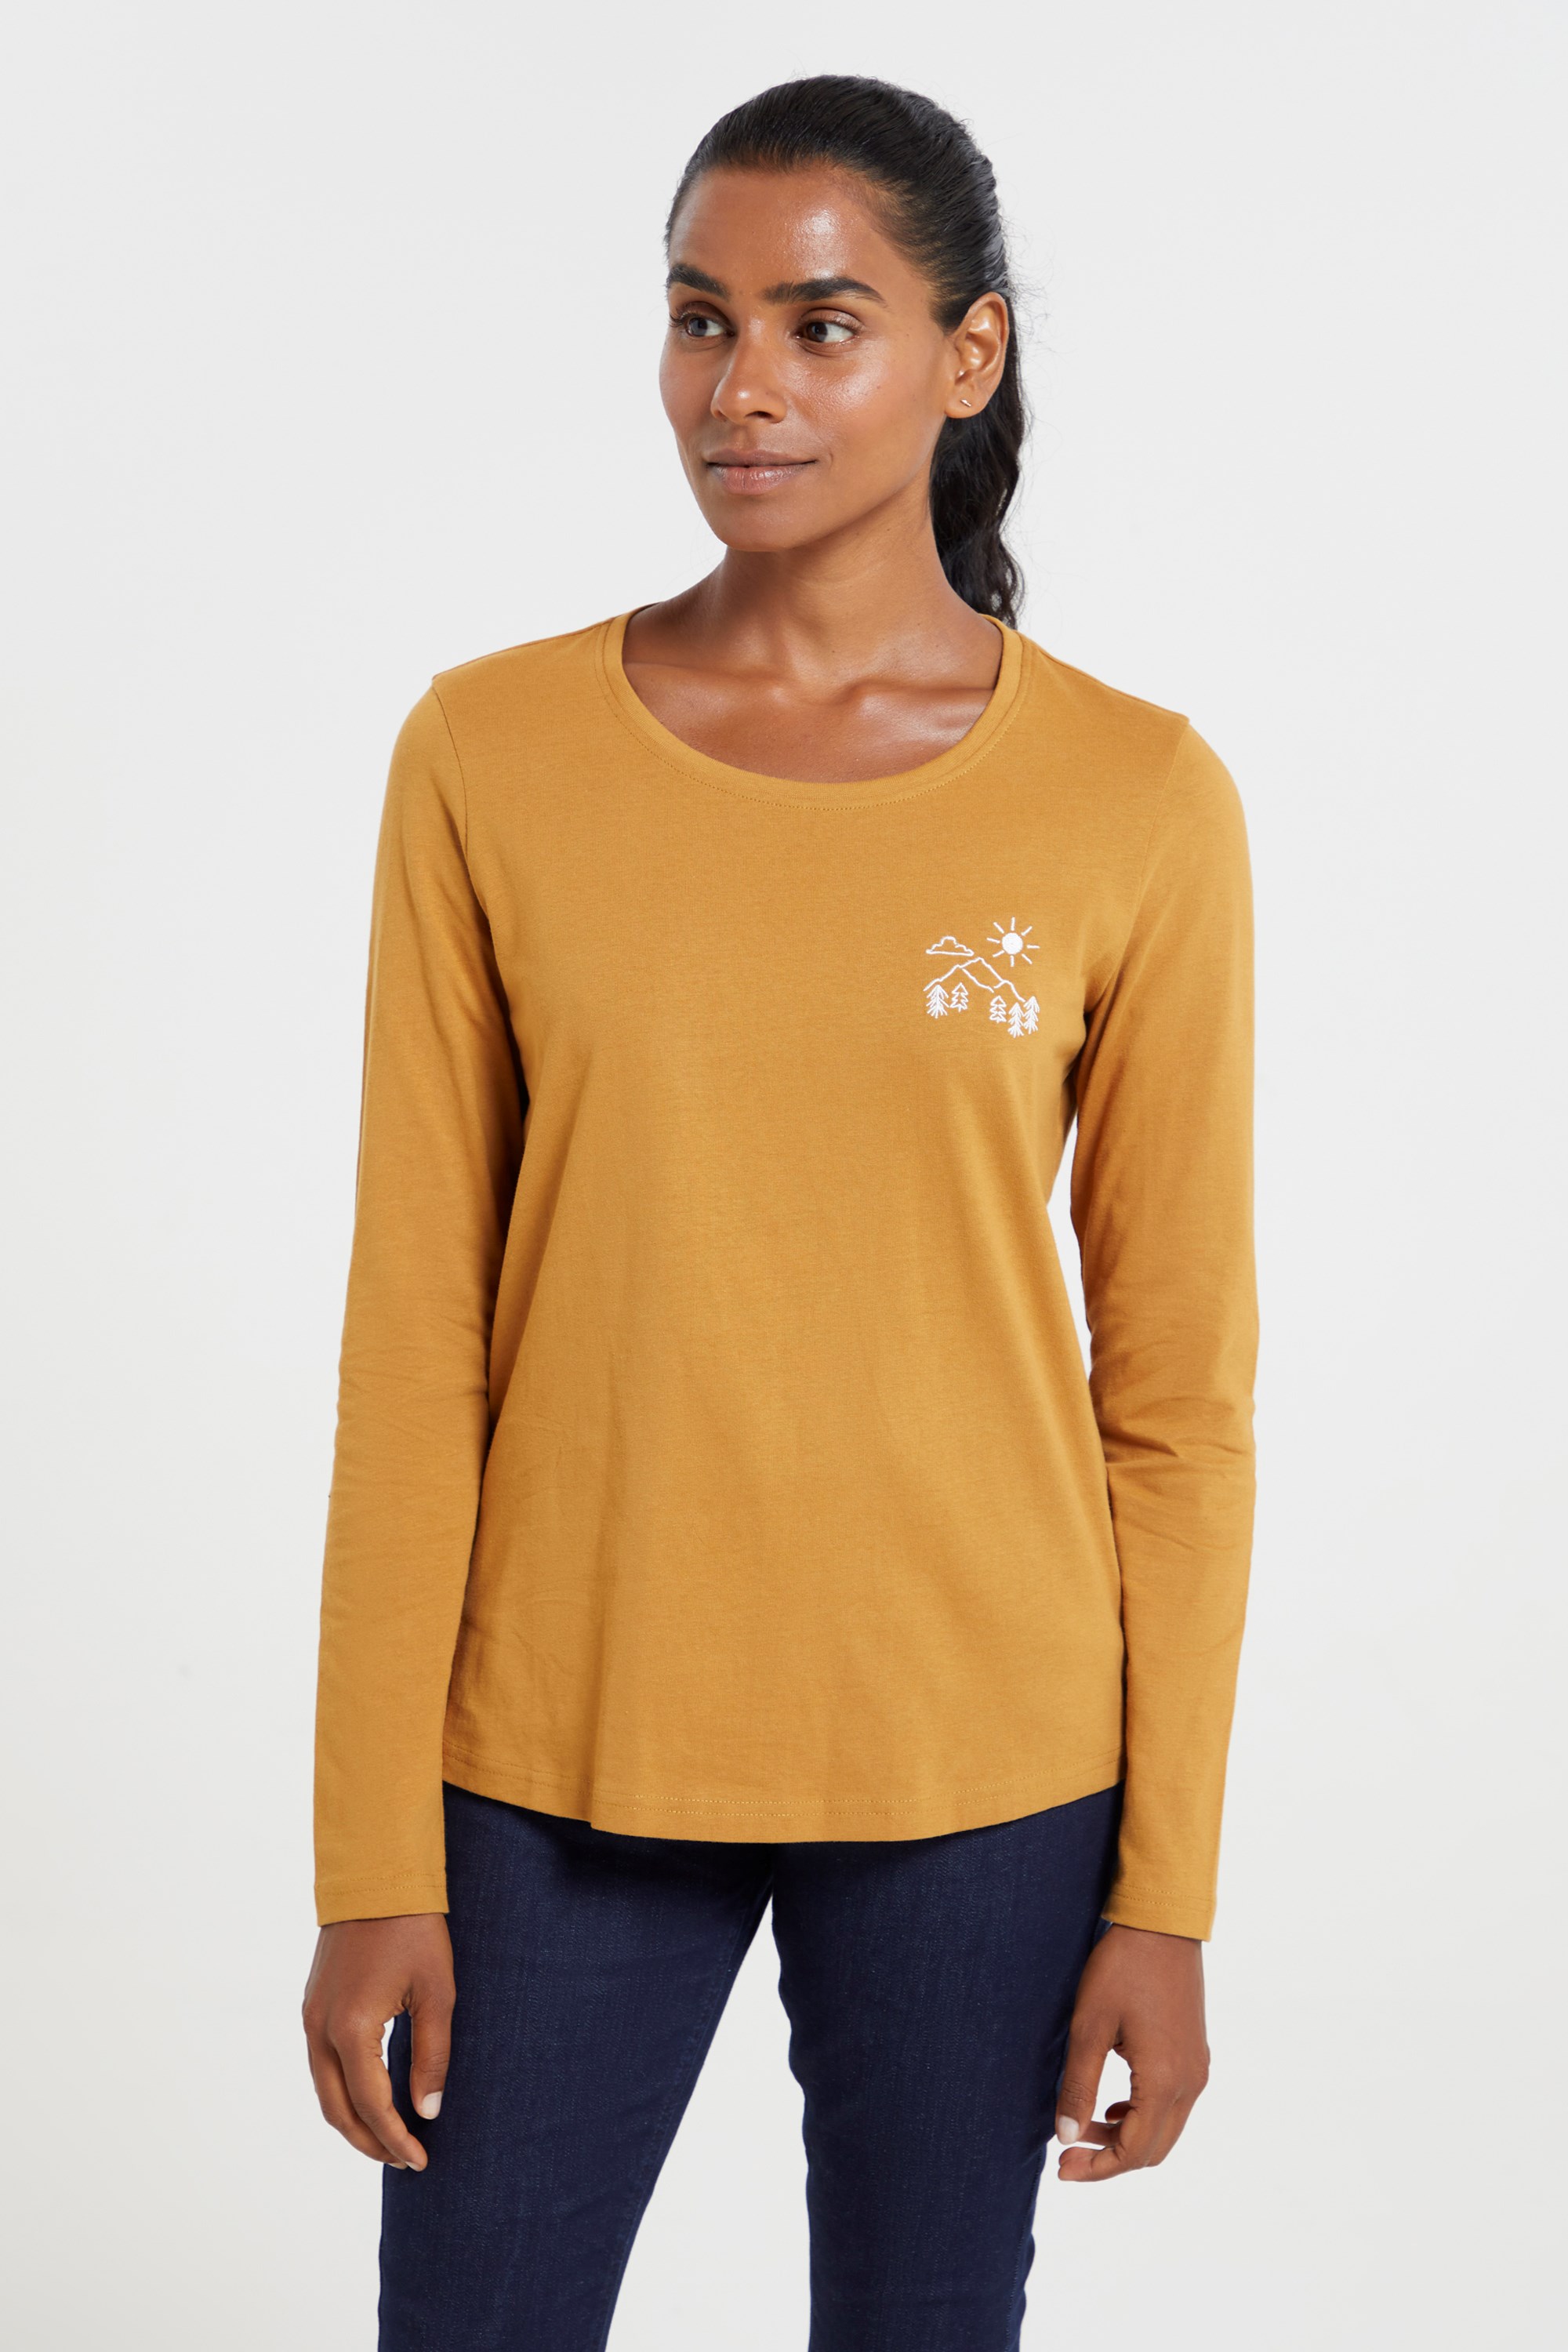 Embroidered Mountain Logo Womens Top - Yellow